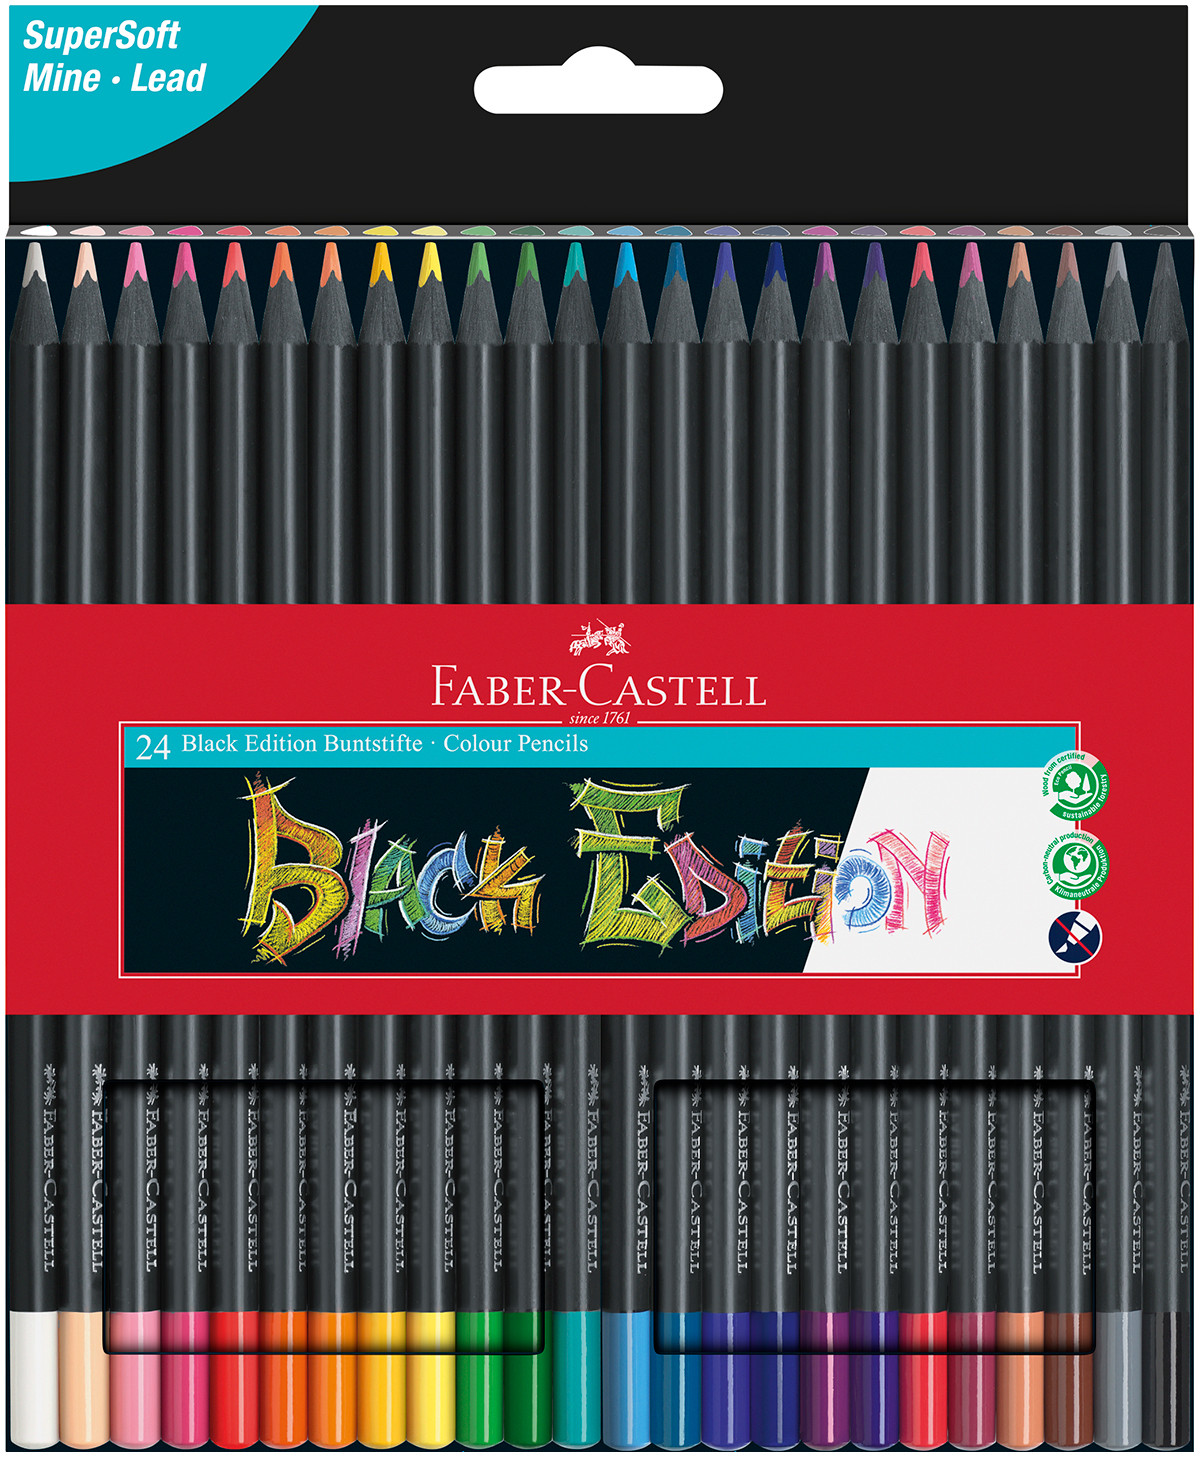 Faber-Castell Black Edition Colouring Pencils - Assorted Colours (Pack of 24)